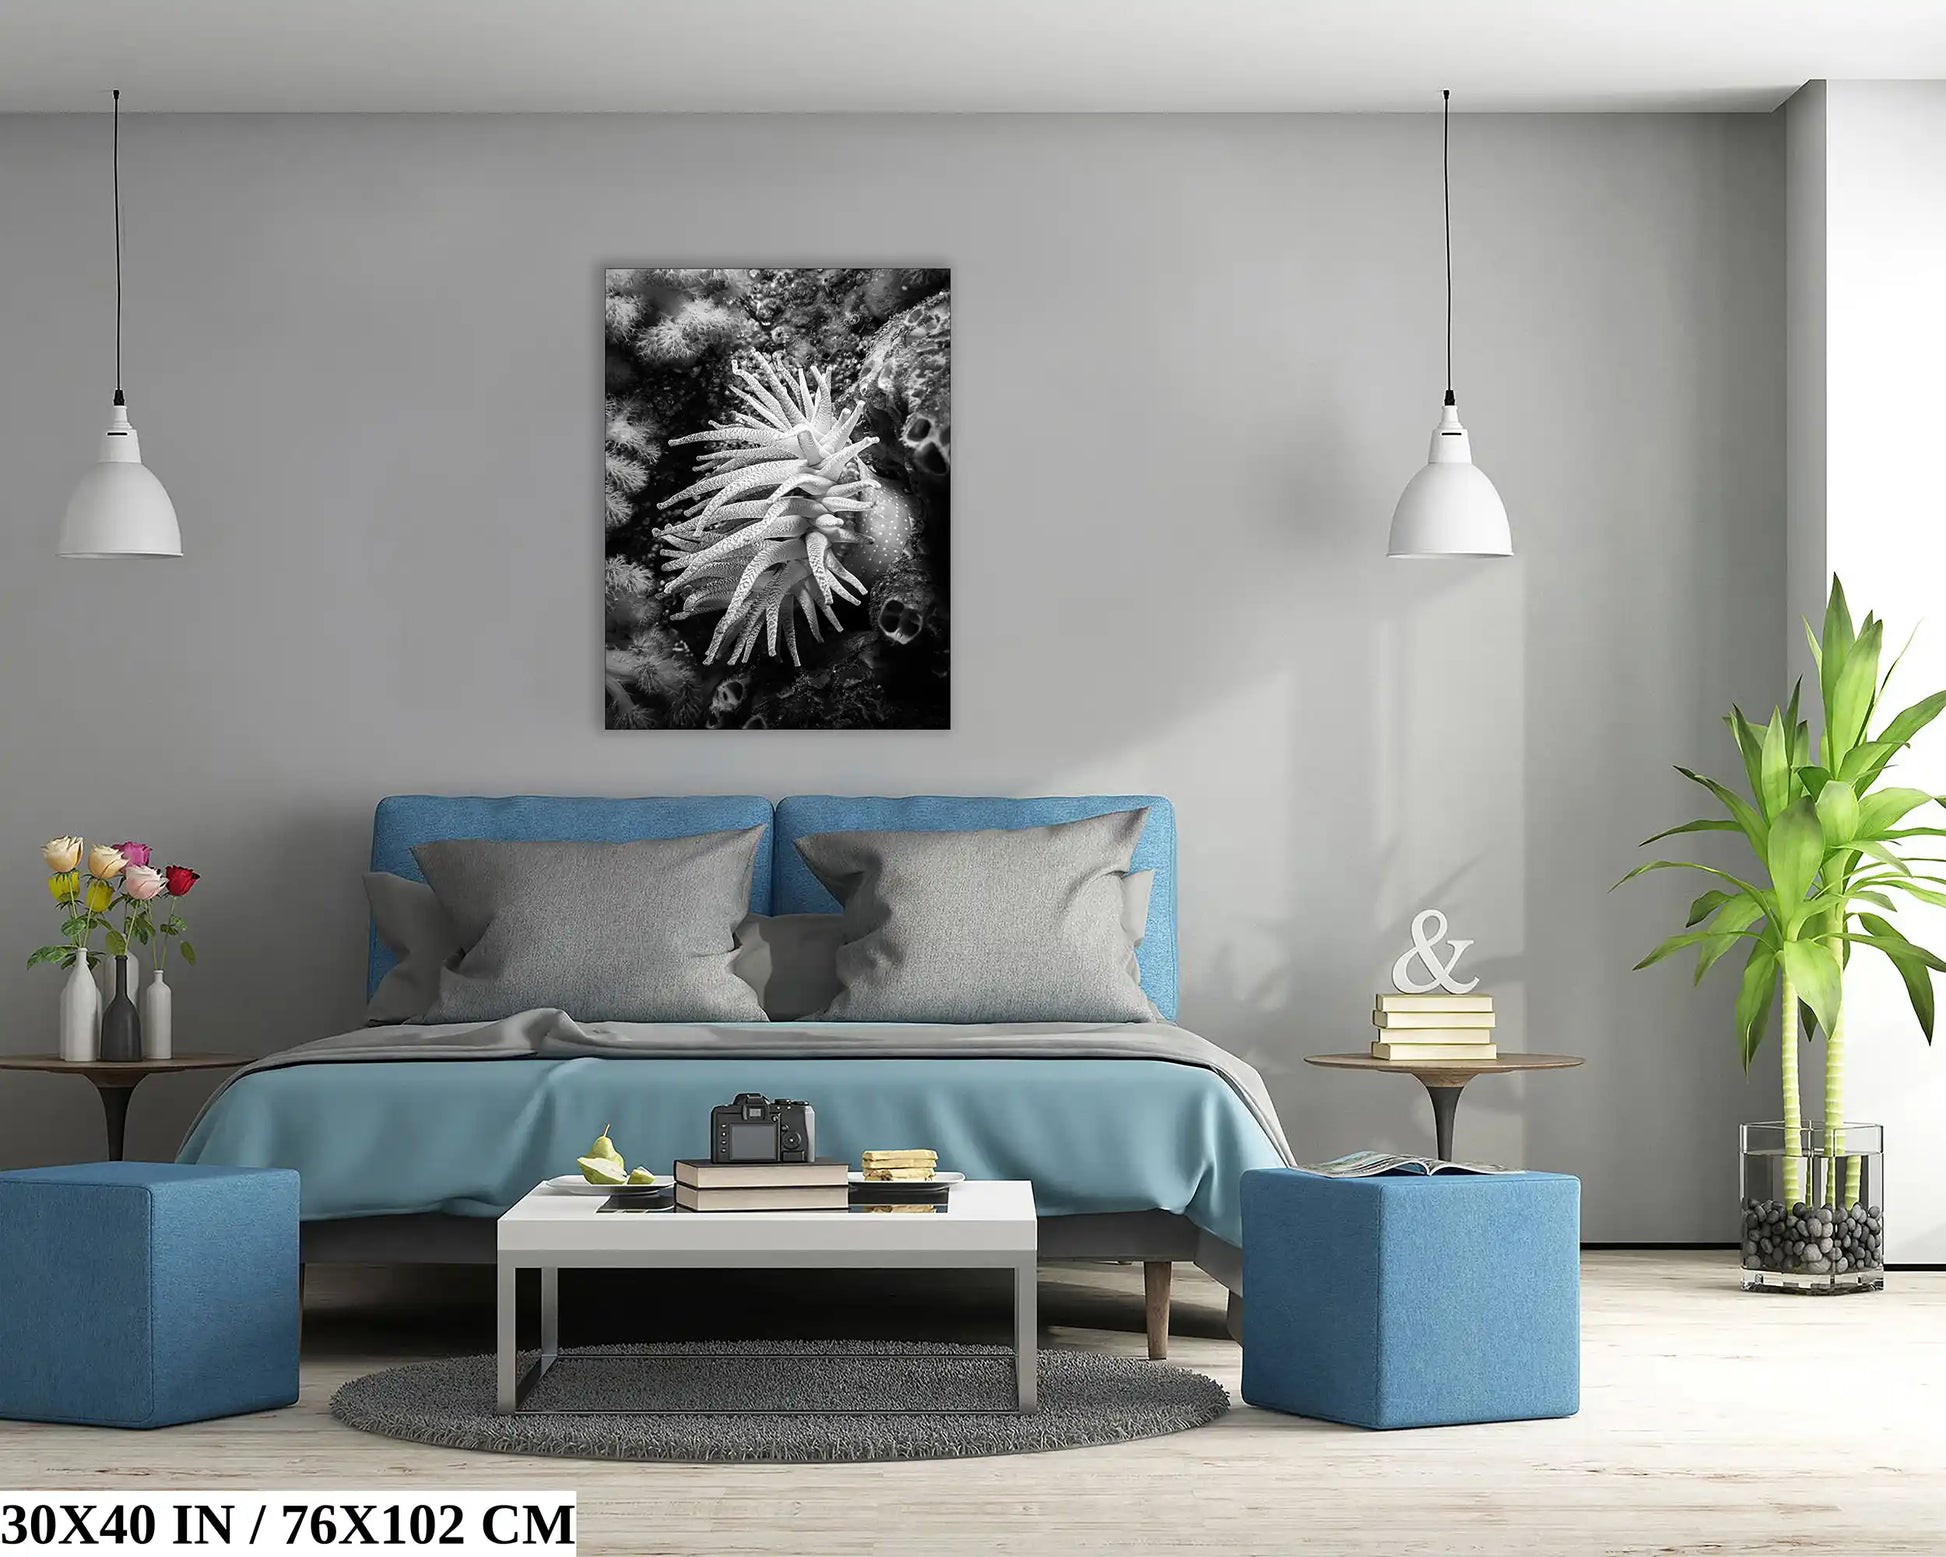 A spacious bedroom featuring a 30x40 canvas print of a Crimson Anemone underwater in black and white, adding a serene touch.